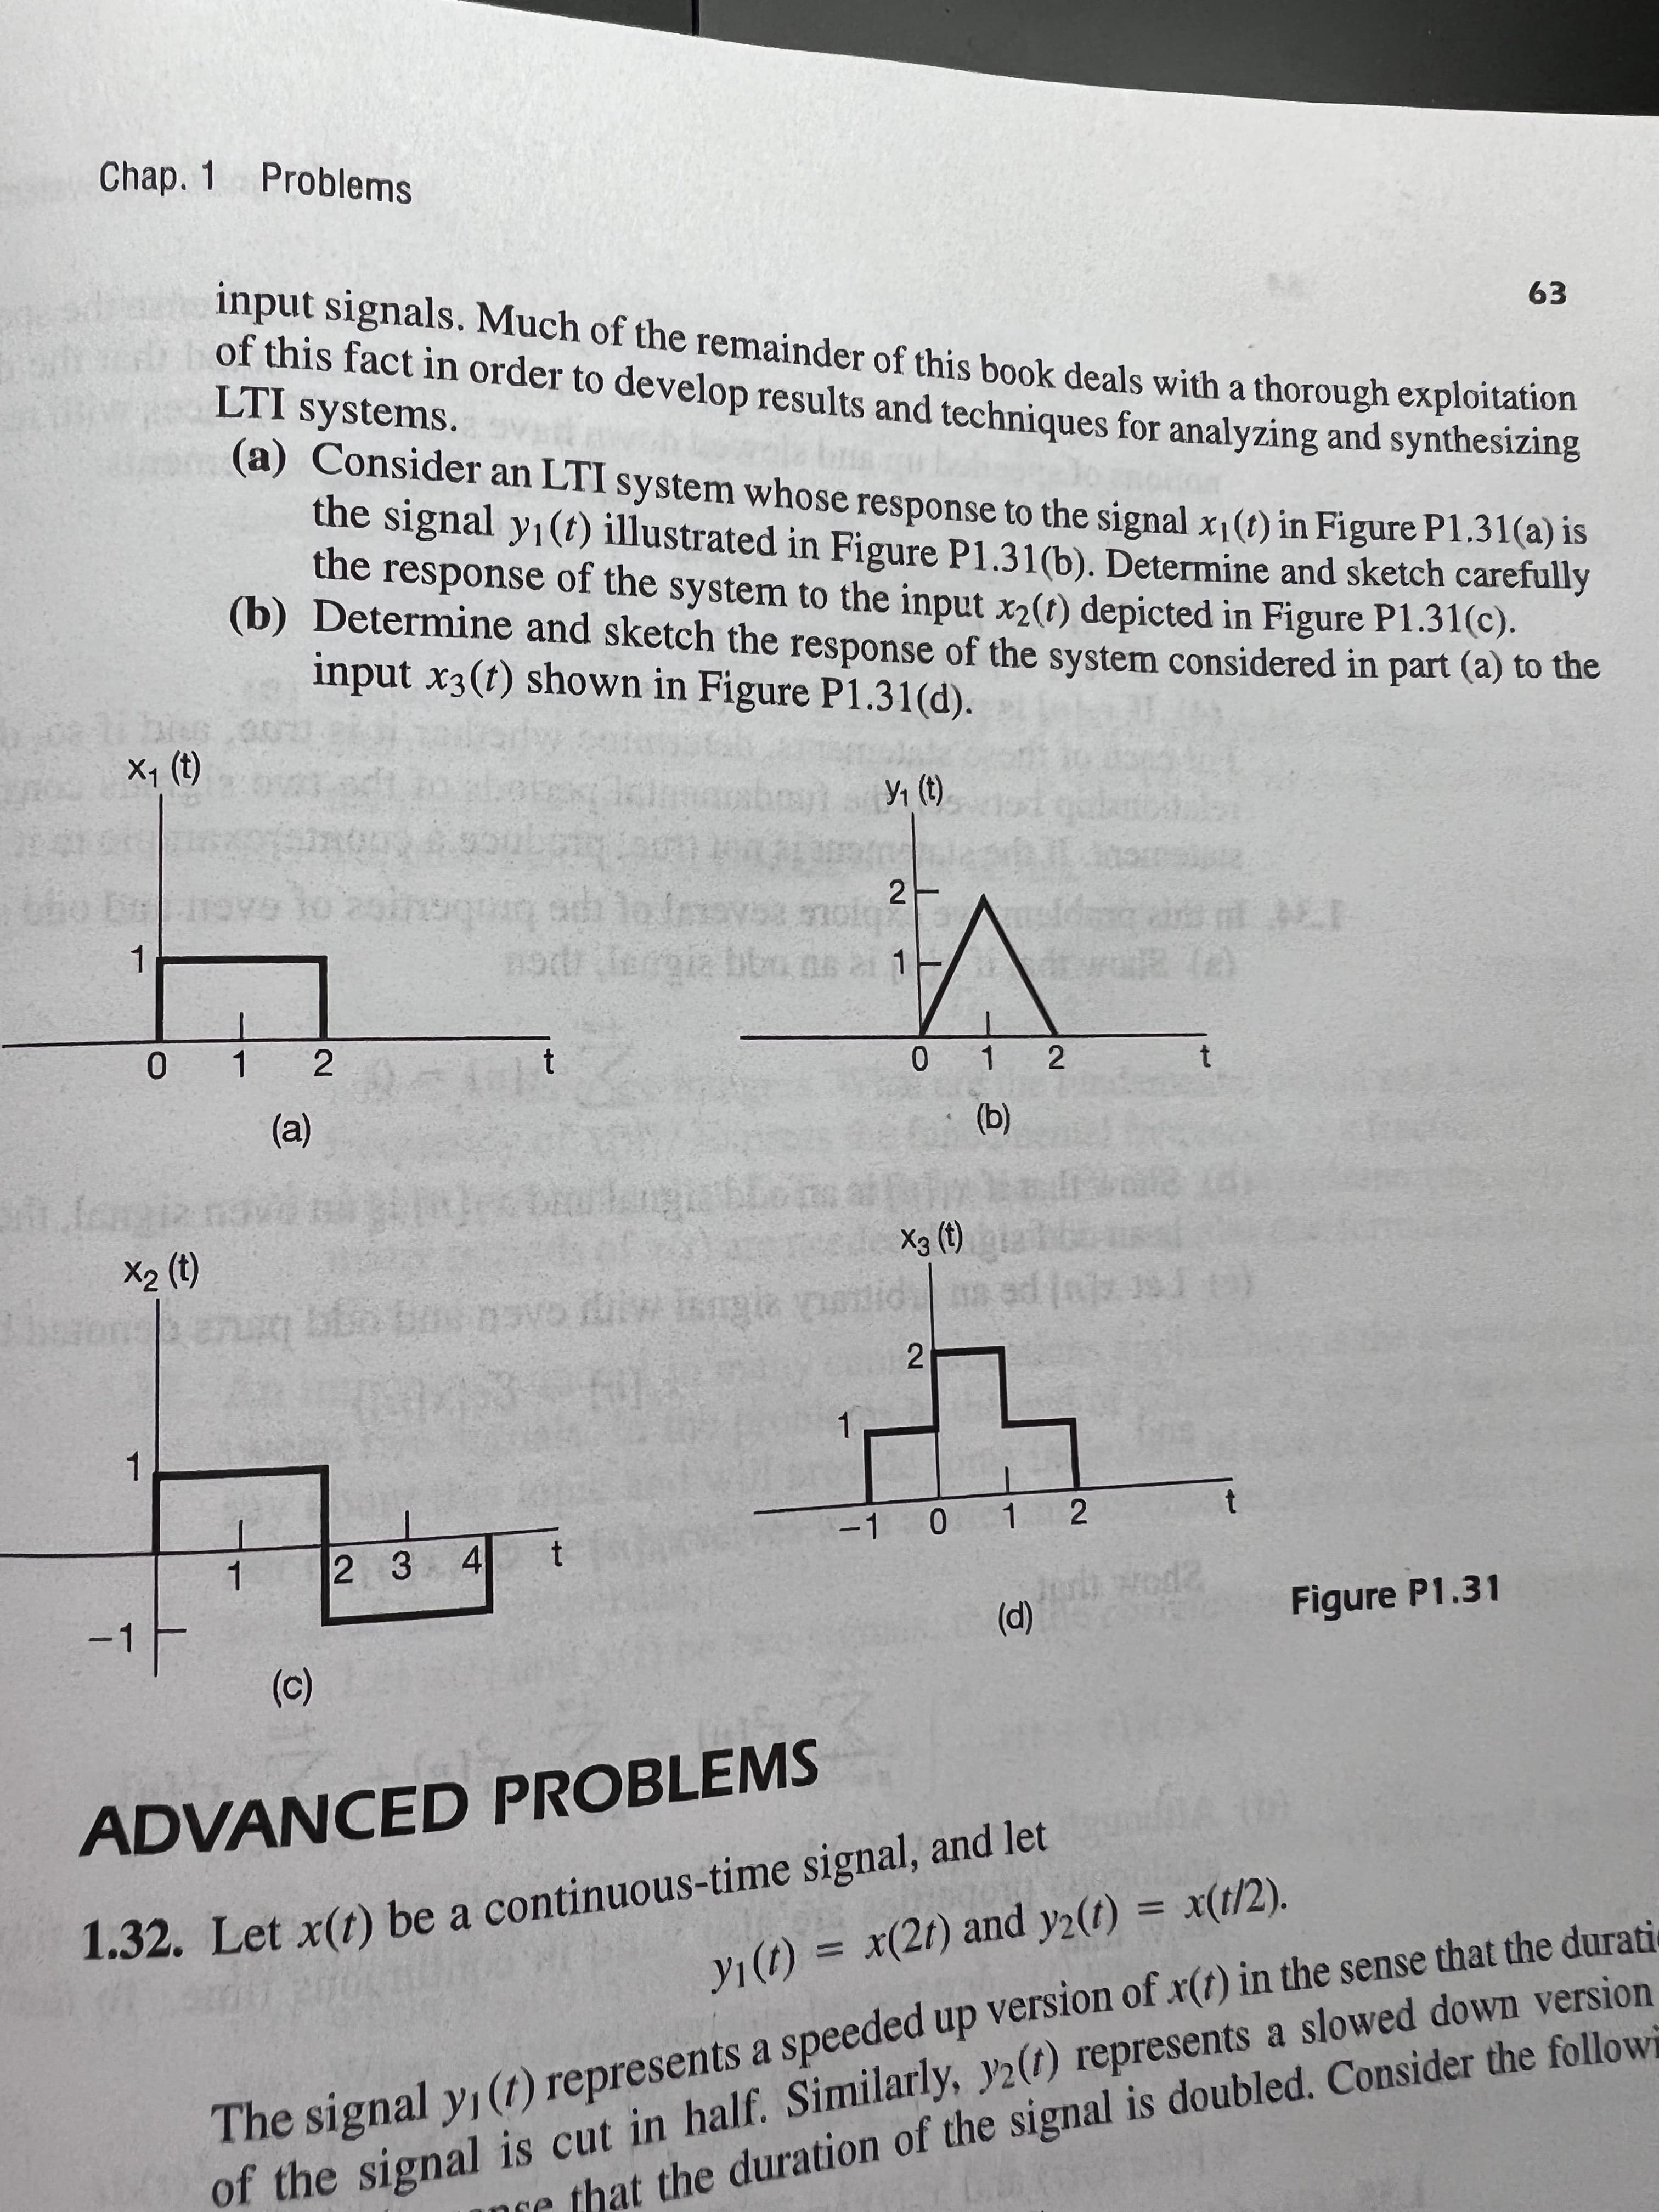 -1
(0)
Chap. 1
Problems
rt input signals. Much of the remainder of this book deals with a thorough exploitation
of this fact in order to develop results and techniques for analyzing and synthesizZing
LTI systems.
(a) Consider an LTI system whose response to the signal x1(t) in Figure P1.31(a) is
the signal y1(t) illustrated in Figure P1.31(b). Determine and sketch carefully
the response of the system to the input x2(t) depicted in Figure P1.31(c).
(b) Determine and sketch the response of the system considered in part (a) to the
input x3(t) shown in Figure P1.31(d).
63
i bius
(1) 'x
GAGIT o
20inoquaq adh 1o Inavs molg
21
nodr lergia bbn ns ai 1
1.
0 1
(a)
(b)
X2 (t)
(1) Ex
21
1.
-1 0 1 2
2 3 4
Figure P1.31
(p)
ADVANCED PROBLEMS
1.32. Let x(t) be a continuous-time signal, and let
%3D
of the signal is cut in half. Similarly, y2(1) represents a slowed down version
re that the duration of the signal is doubled. Consider the followi
The signal y (1) represents a speeded up version of x(t) in the sense that the durati
